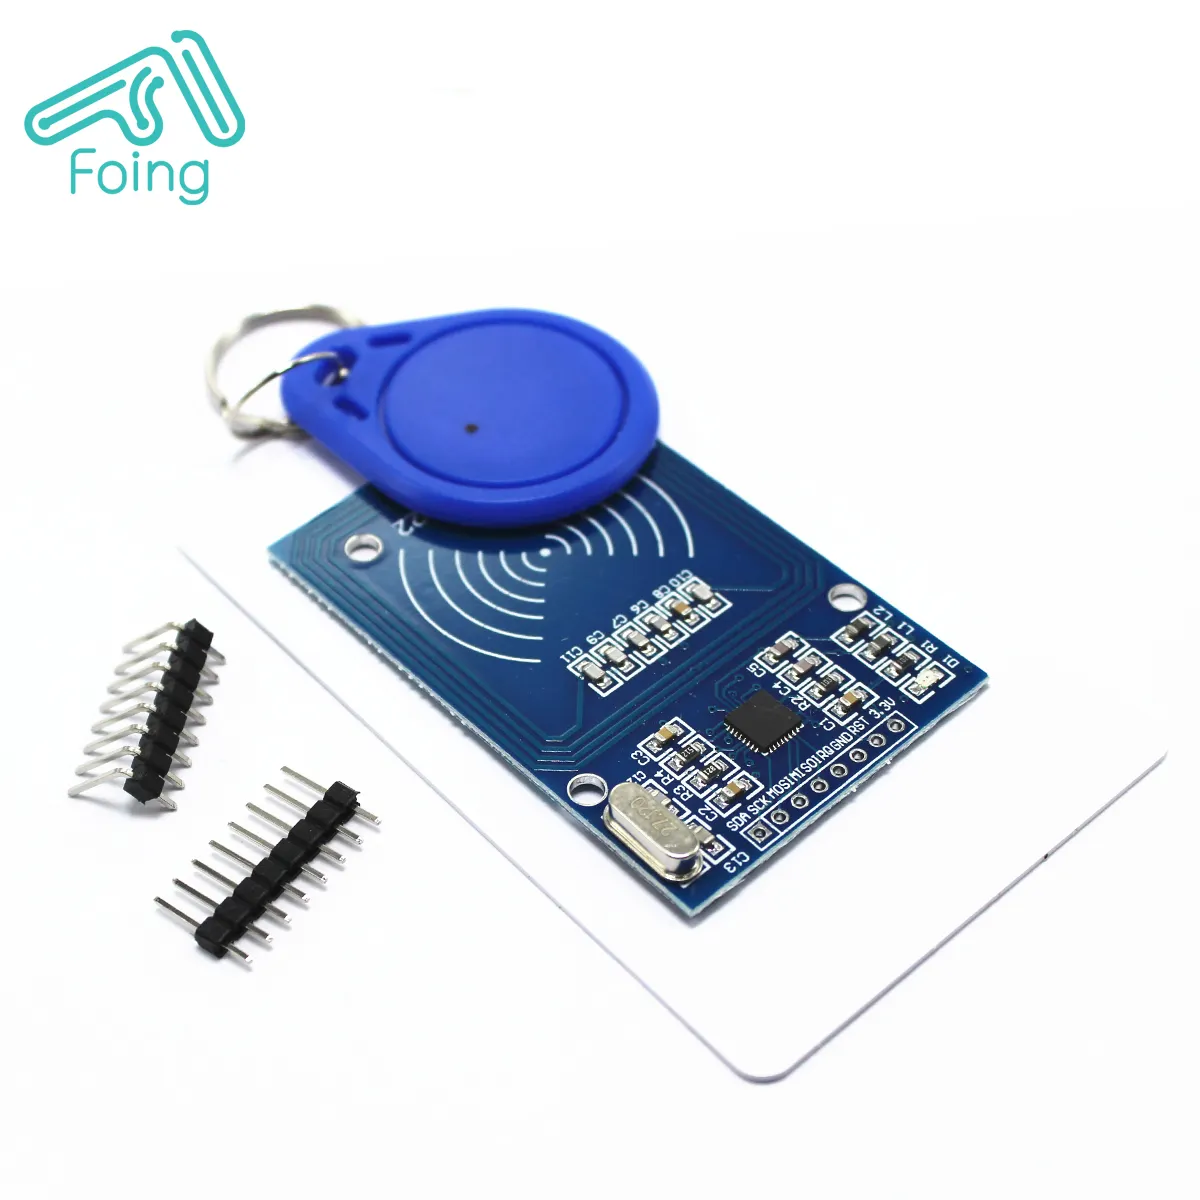 13.56Mhz RFID-RC522 MFRC-522 Module Kit with S50 Card and Key